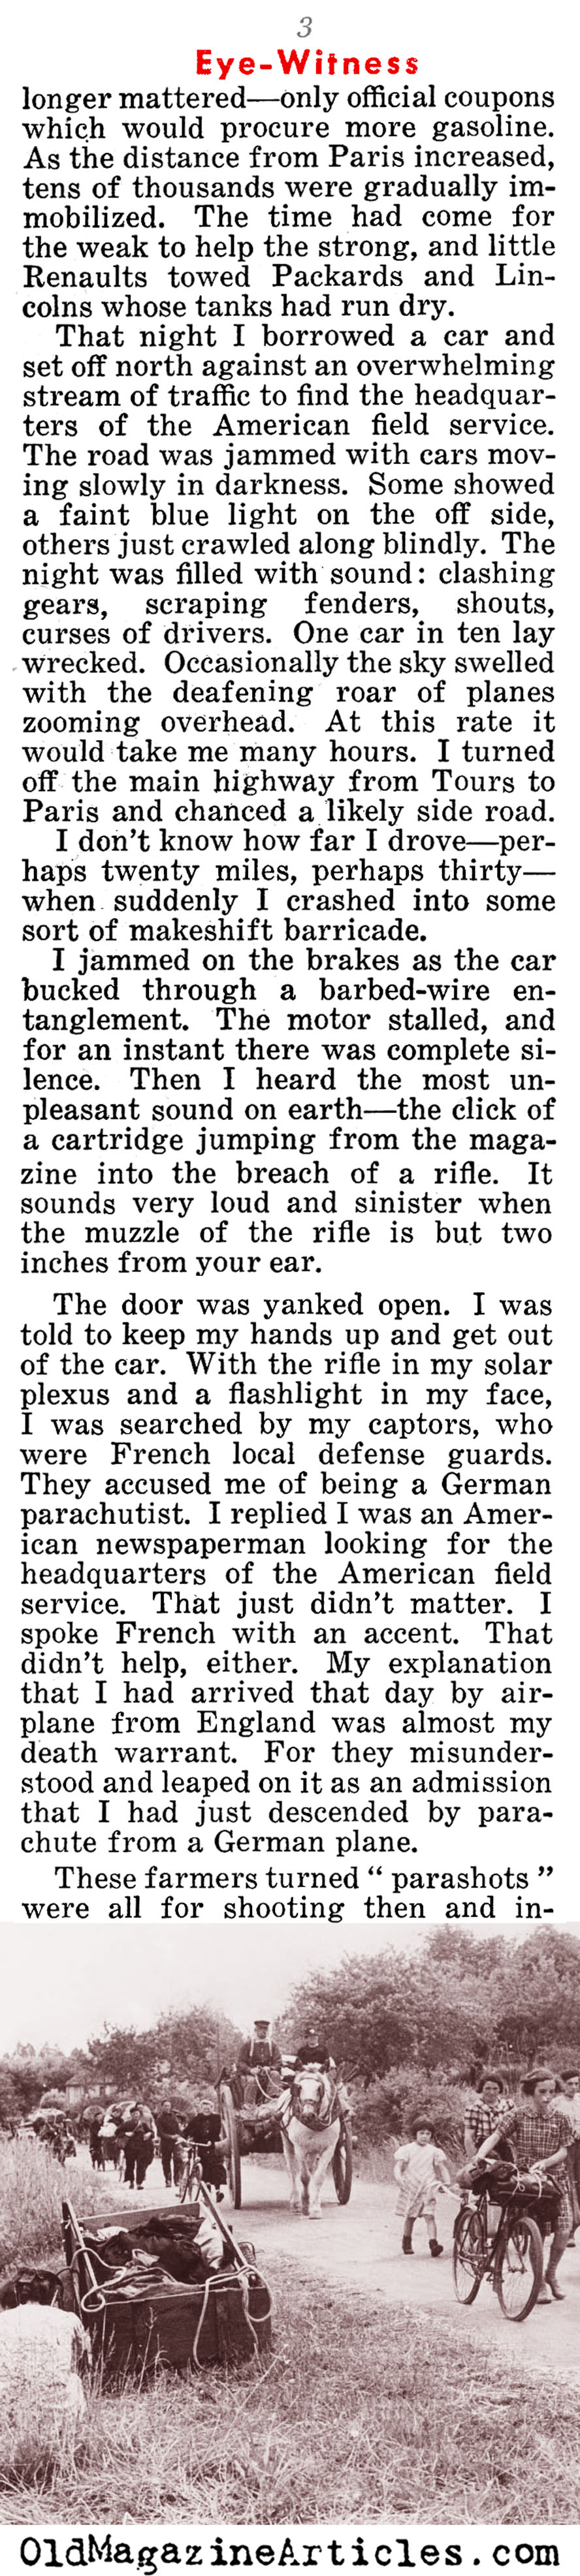 He Saw the French Defense Implode (Liberty Magazine, 1940)